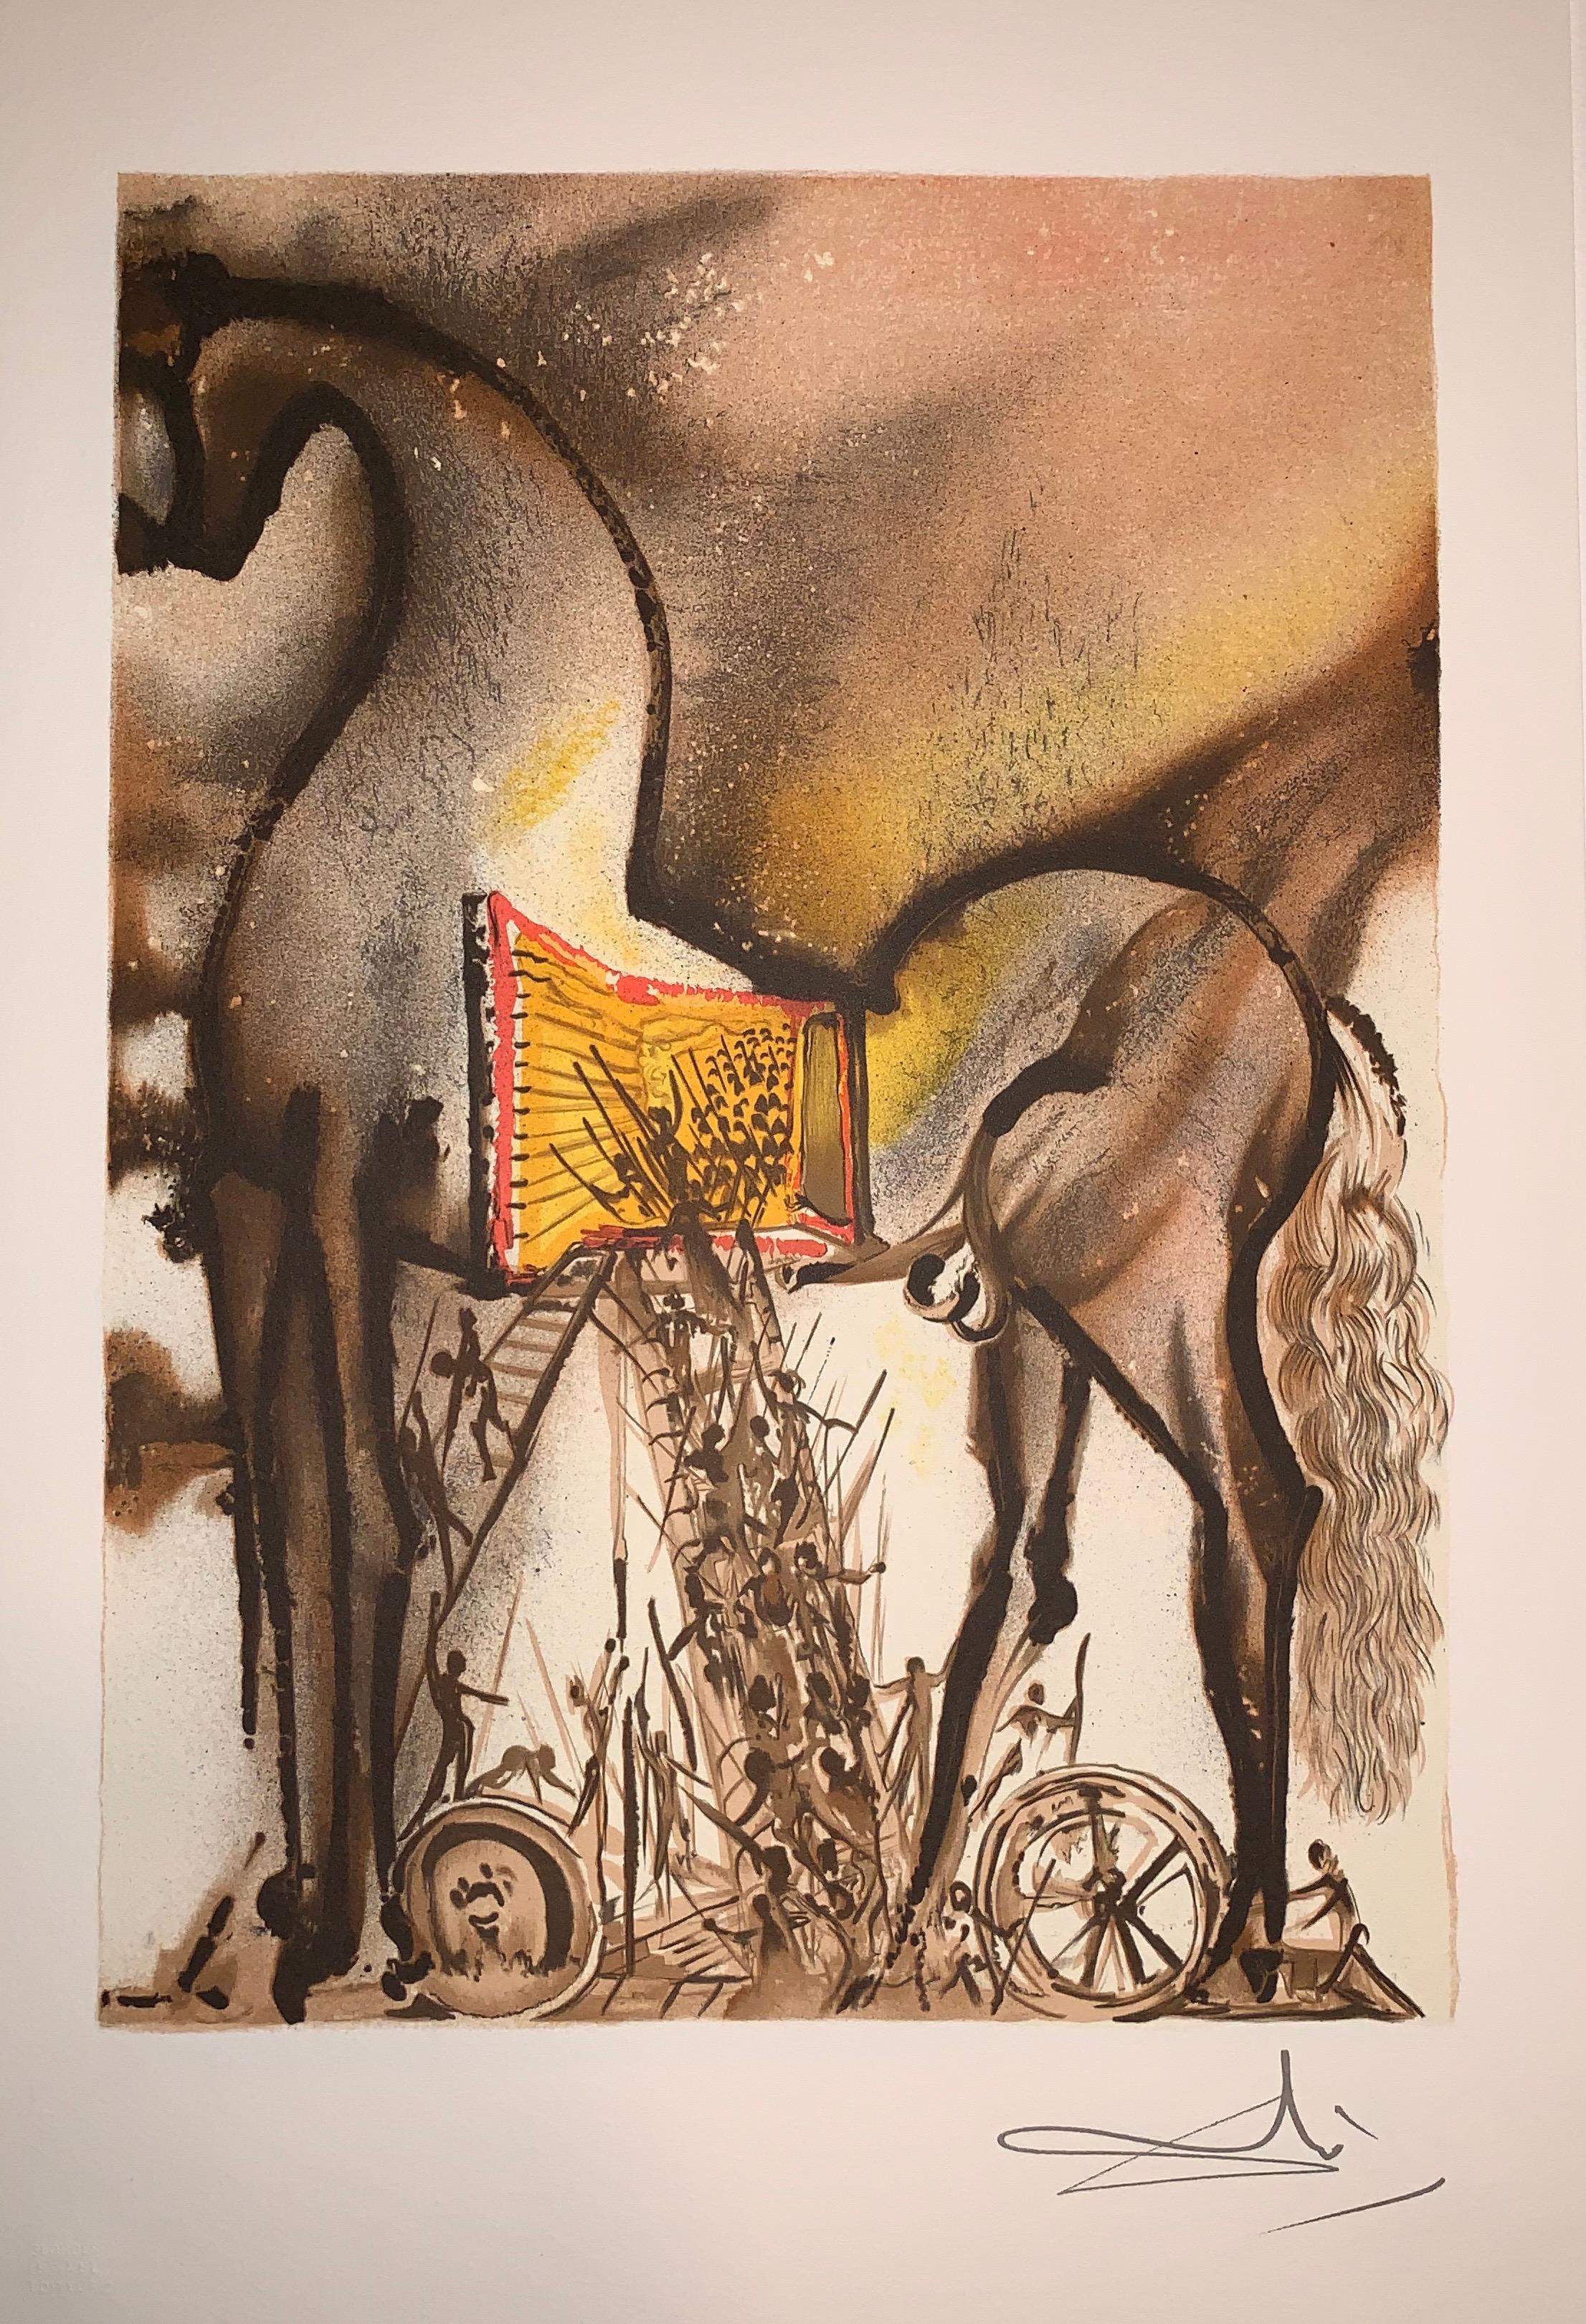 Trojan Horse - The horses of Dali - Lithograph - Surrealist - 1983 - Print by (after) Salvador Dali